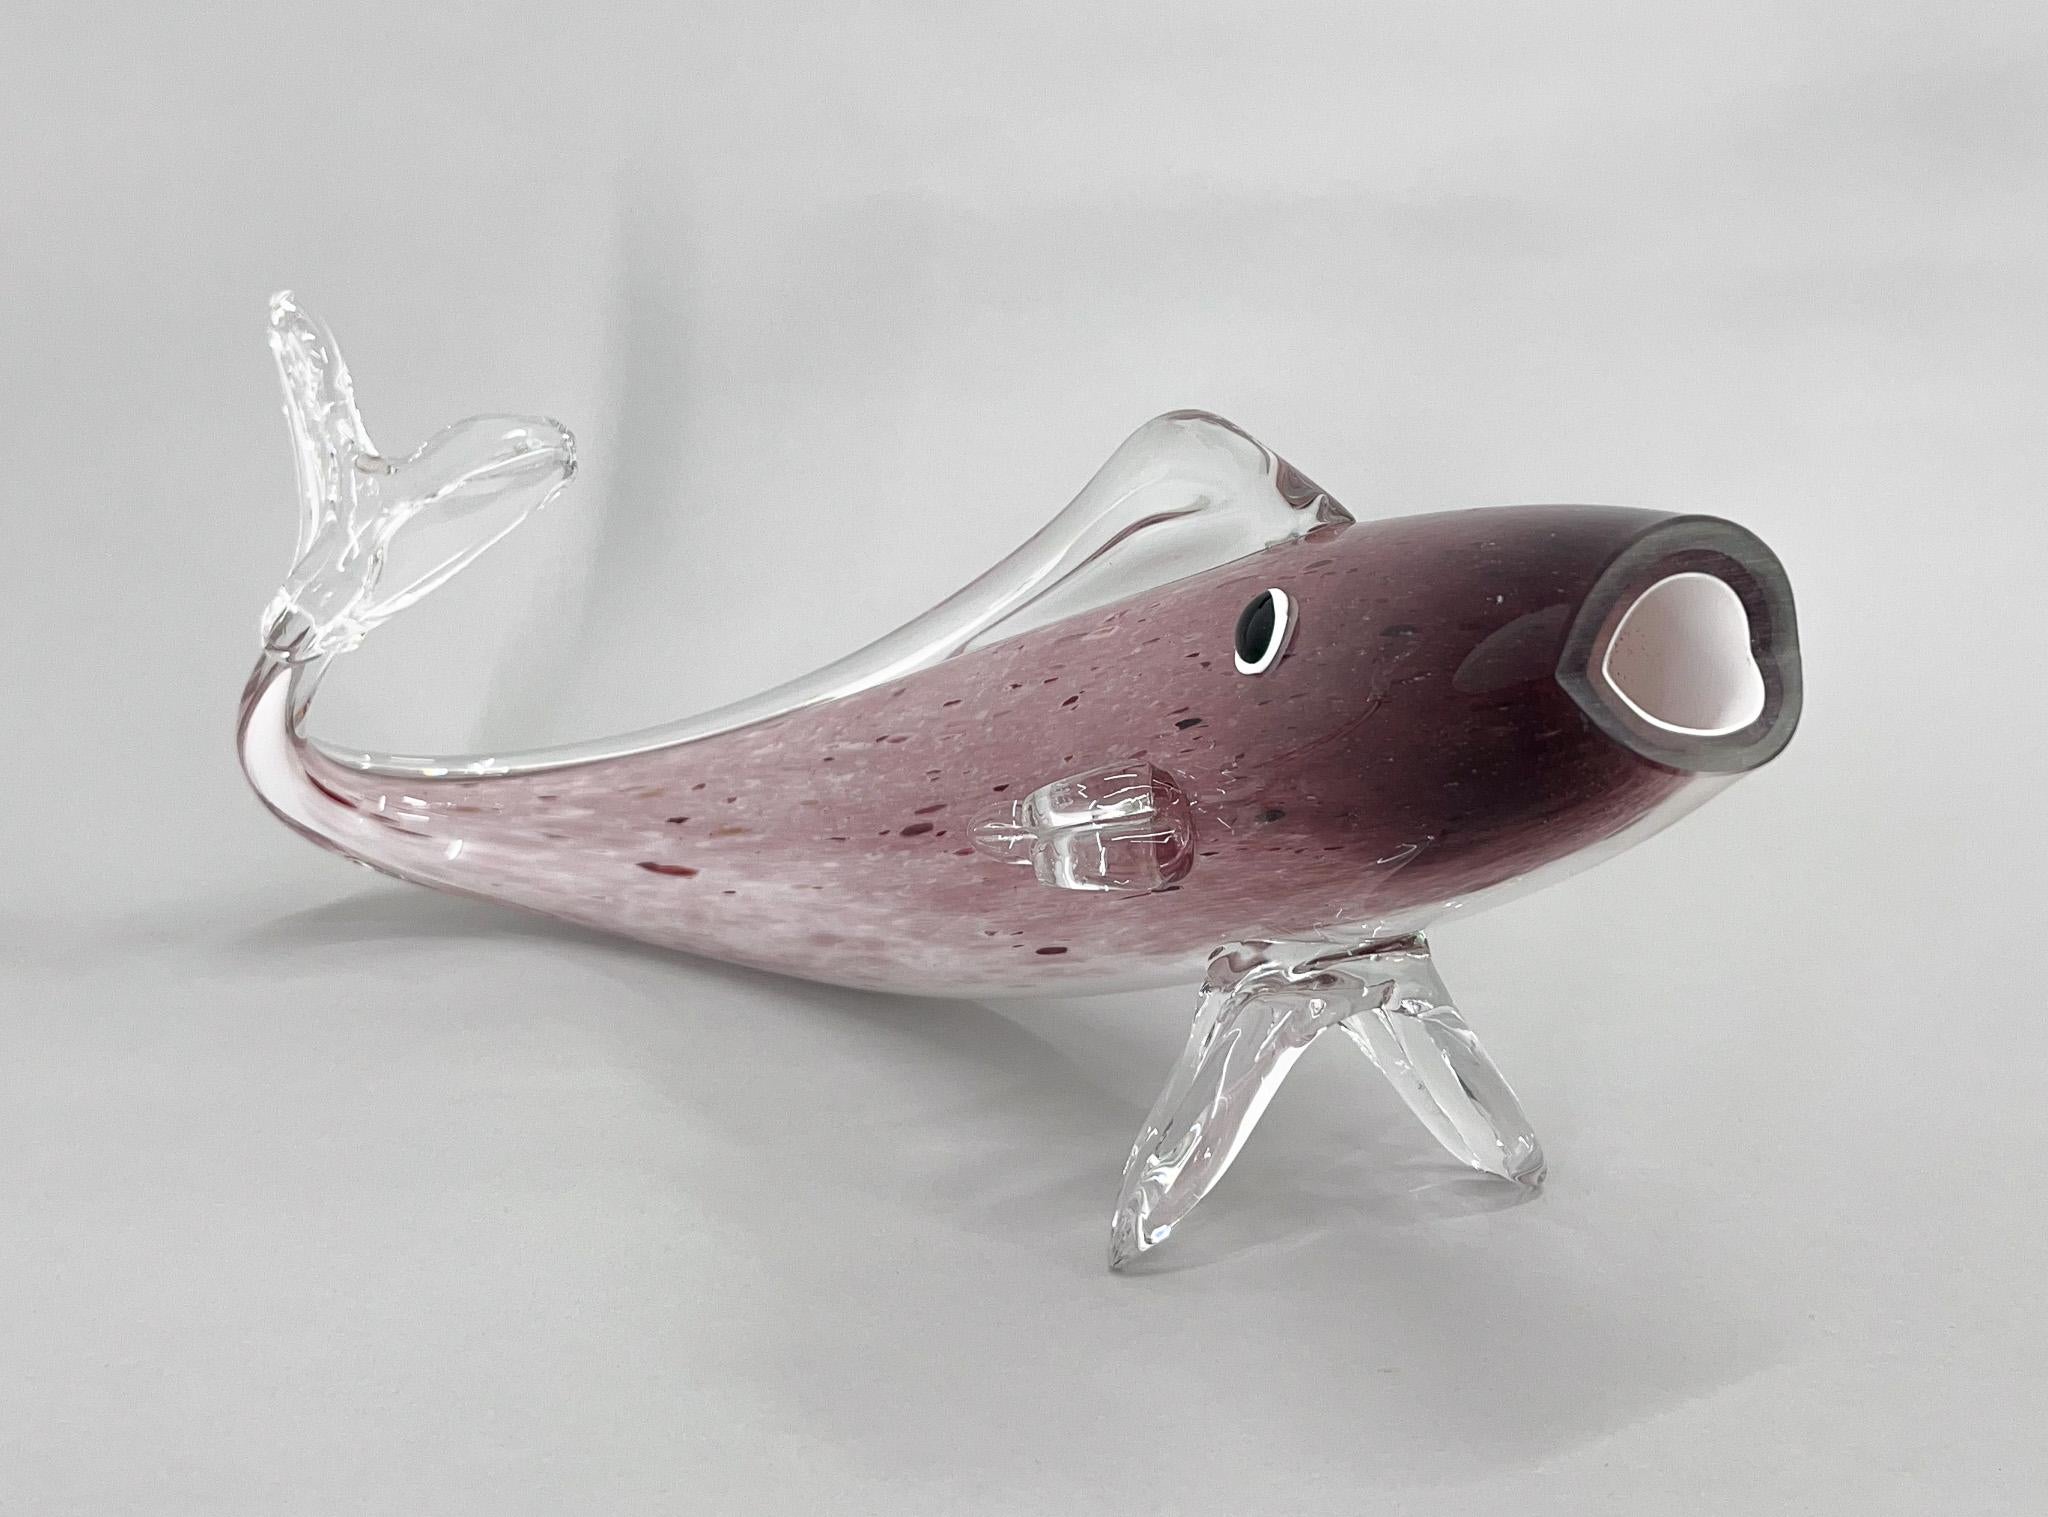 Czech 1970s Large Bohemian Glass Fish For Sale